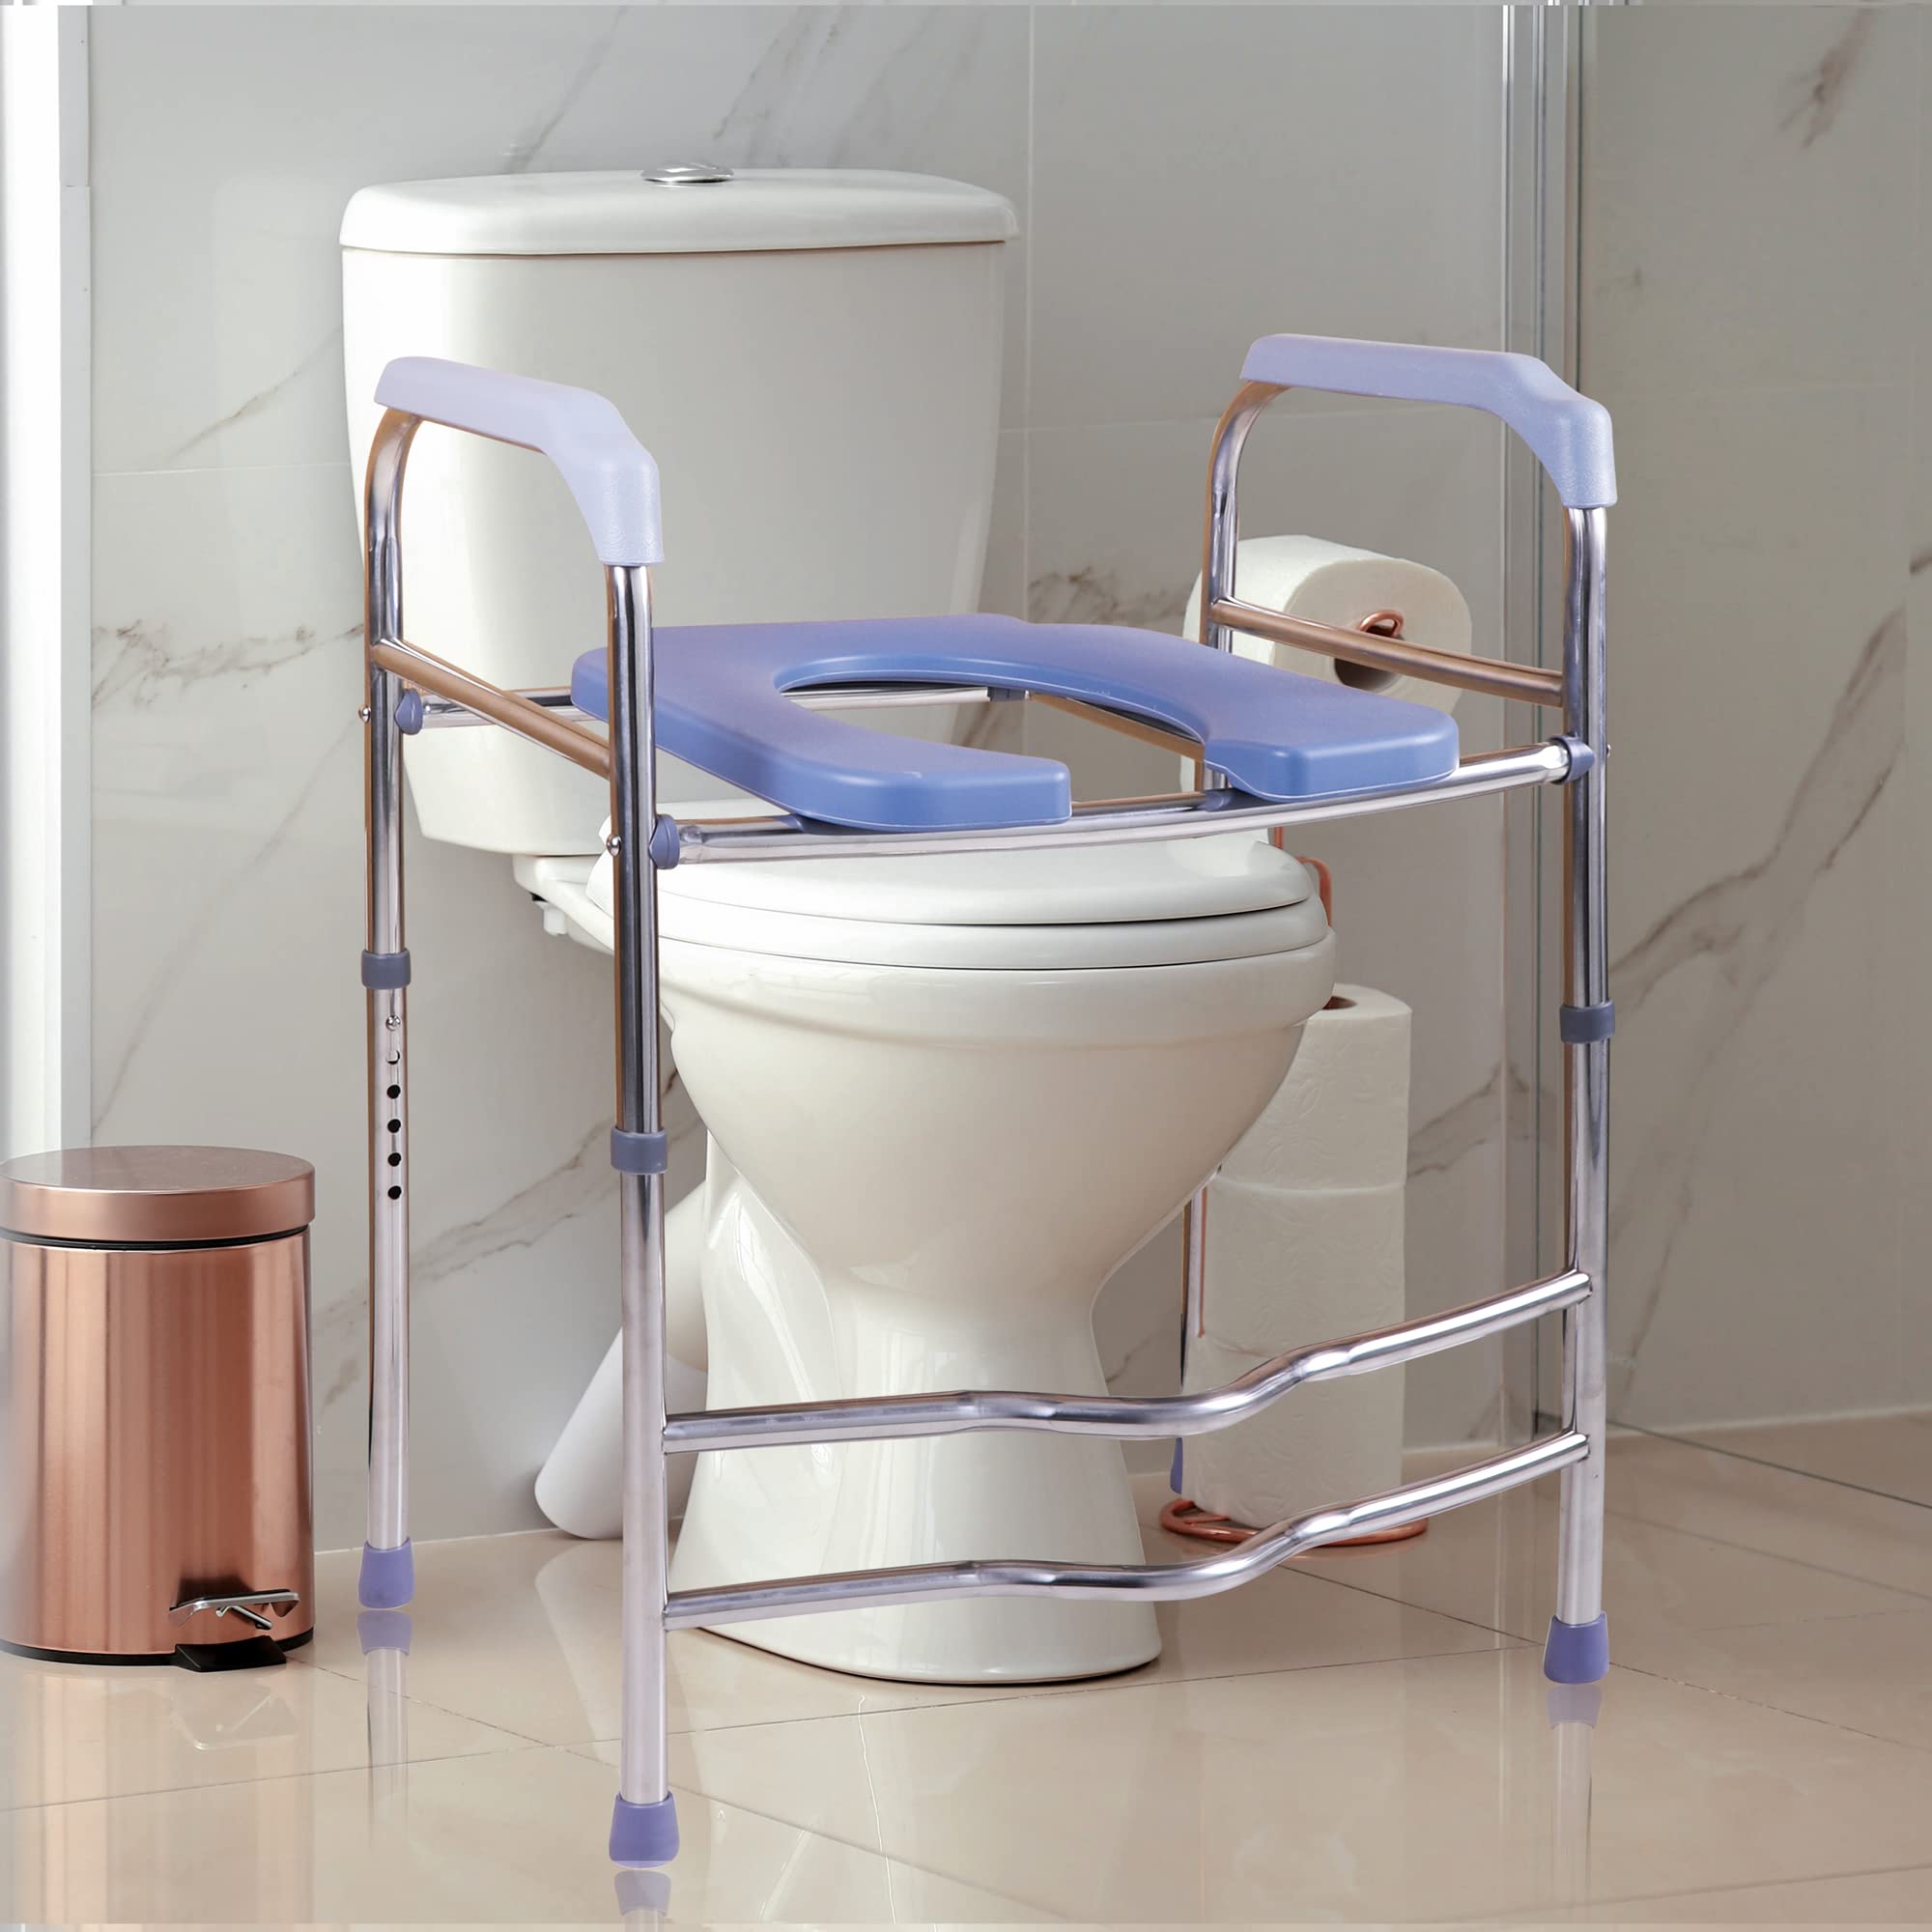 Deewow Raised Toilet Seat with Handles 400lbs, Elevated Toilet Seat Riser Bathroom Stand Alone Toilet Safety Frame for Elderly, Pregnant and Handicap, Adjustable Height, Fit Any Toilet